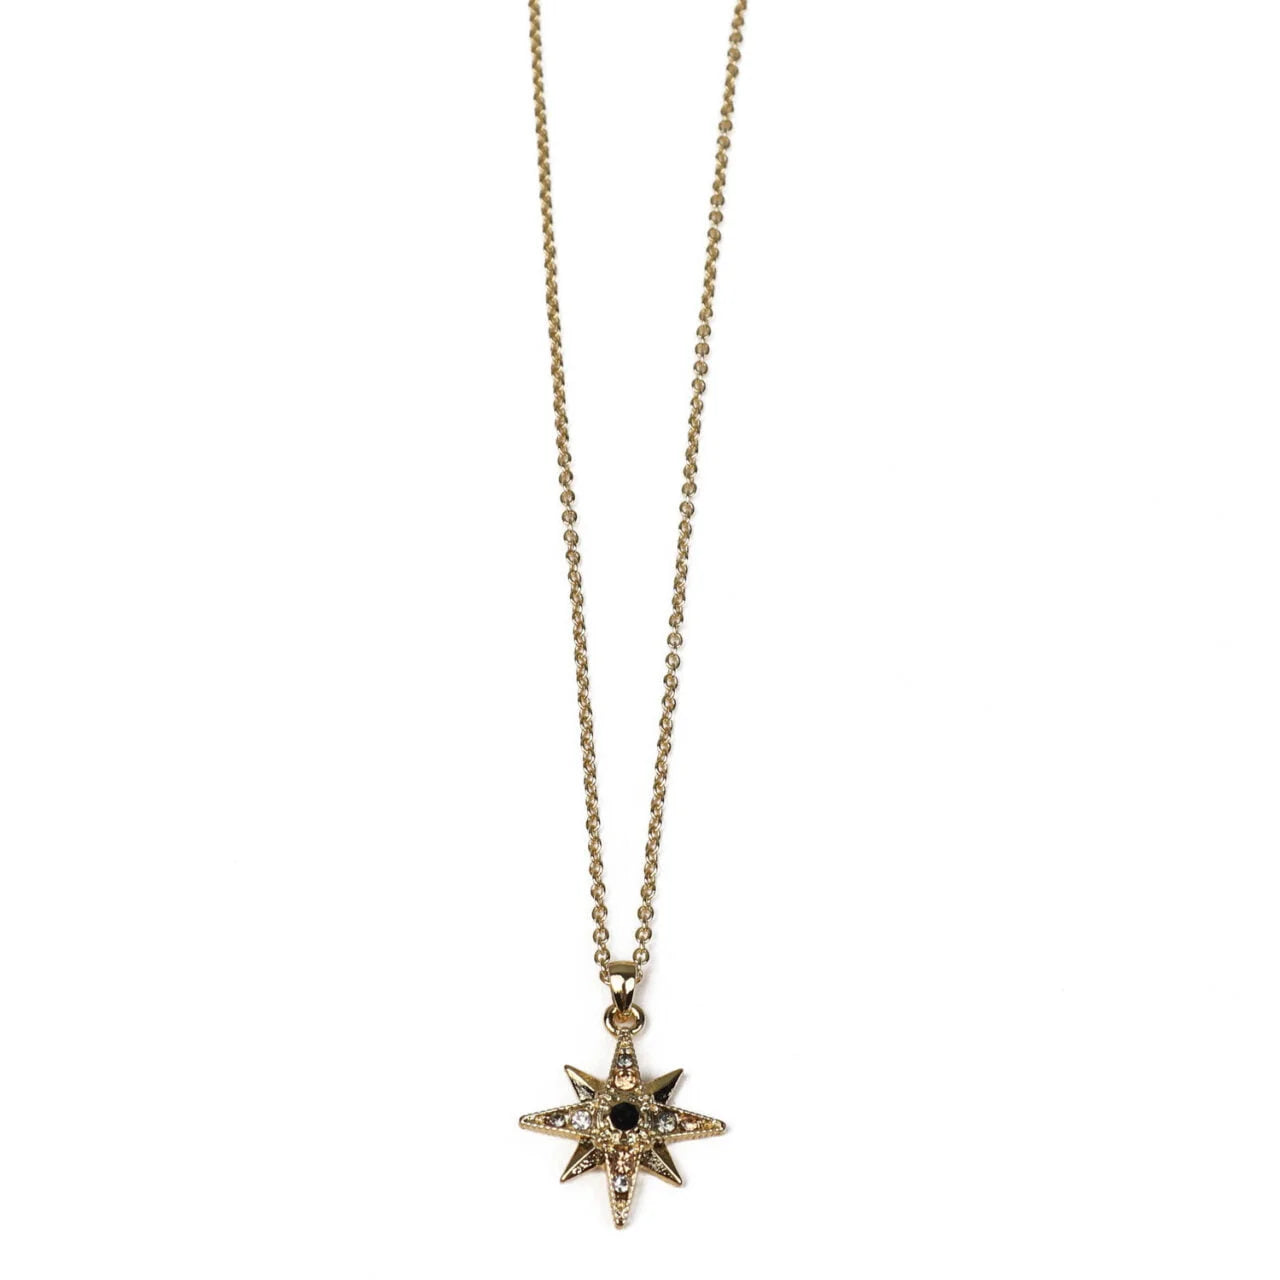 Fab Gifts | Jewellery Necklace Gold Star Black by Weirs of Baggot Street